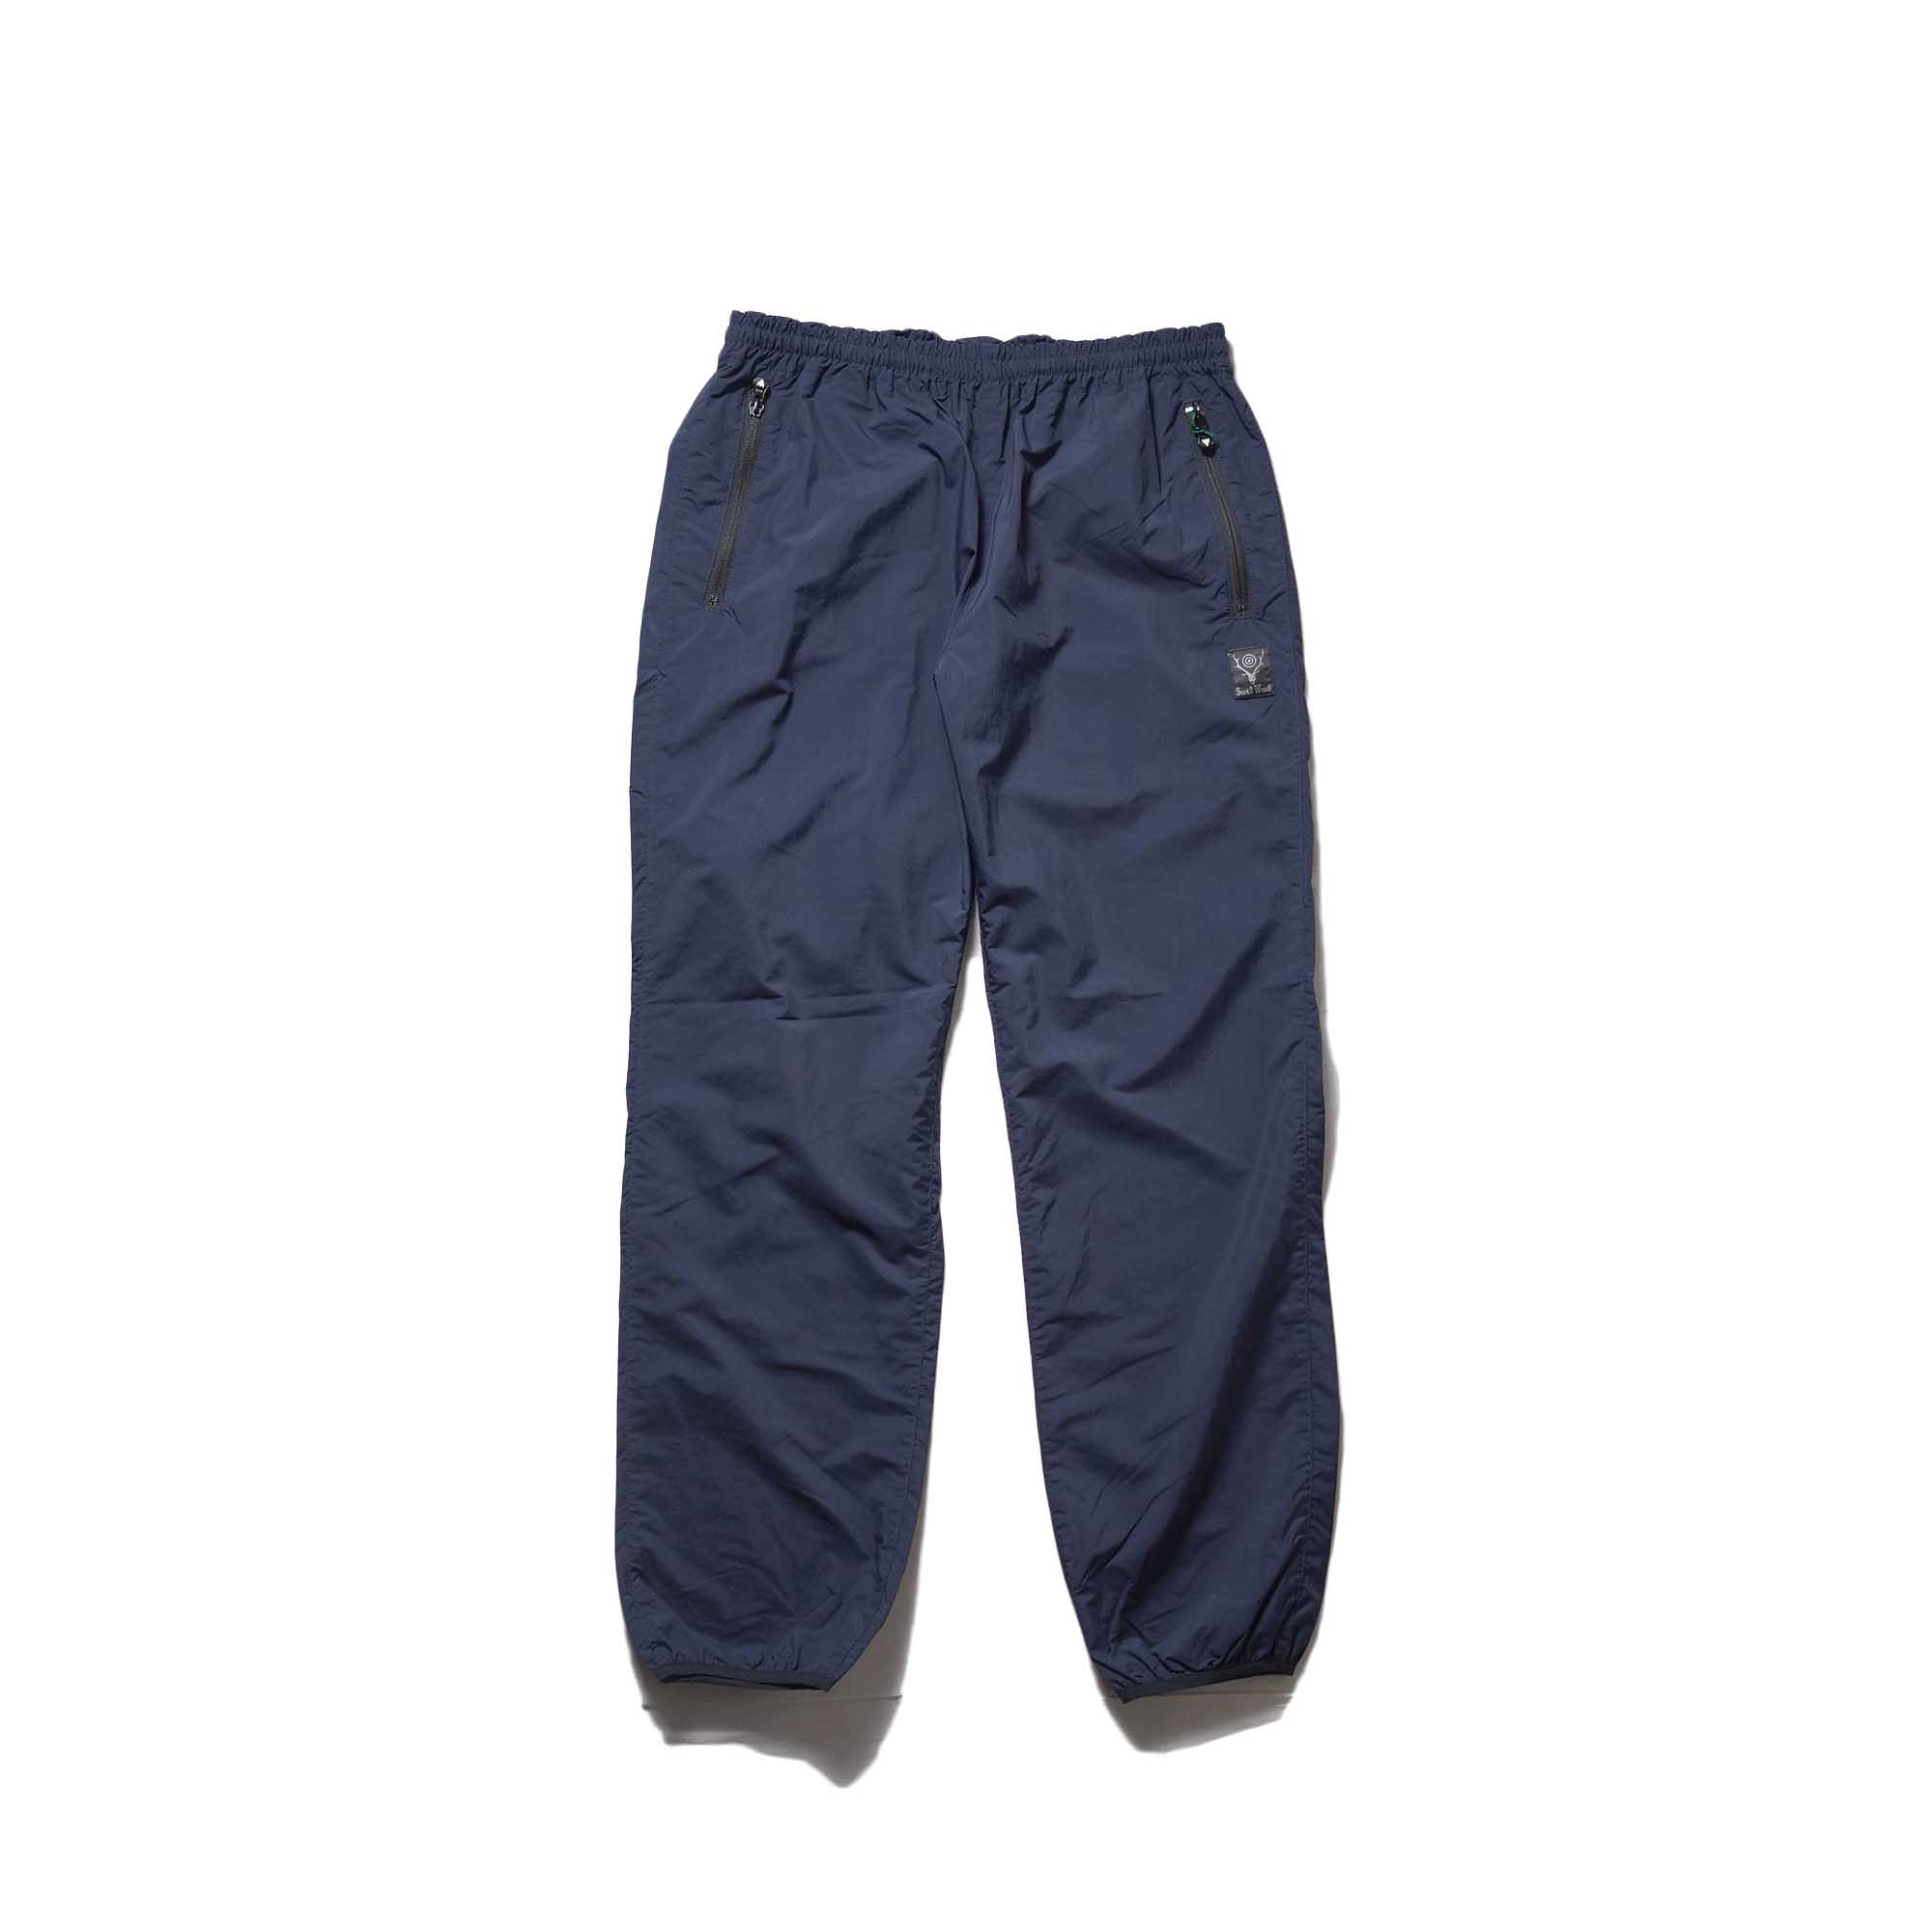 South2 West8 / Packable Pant (Navy)